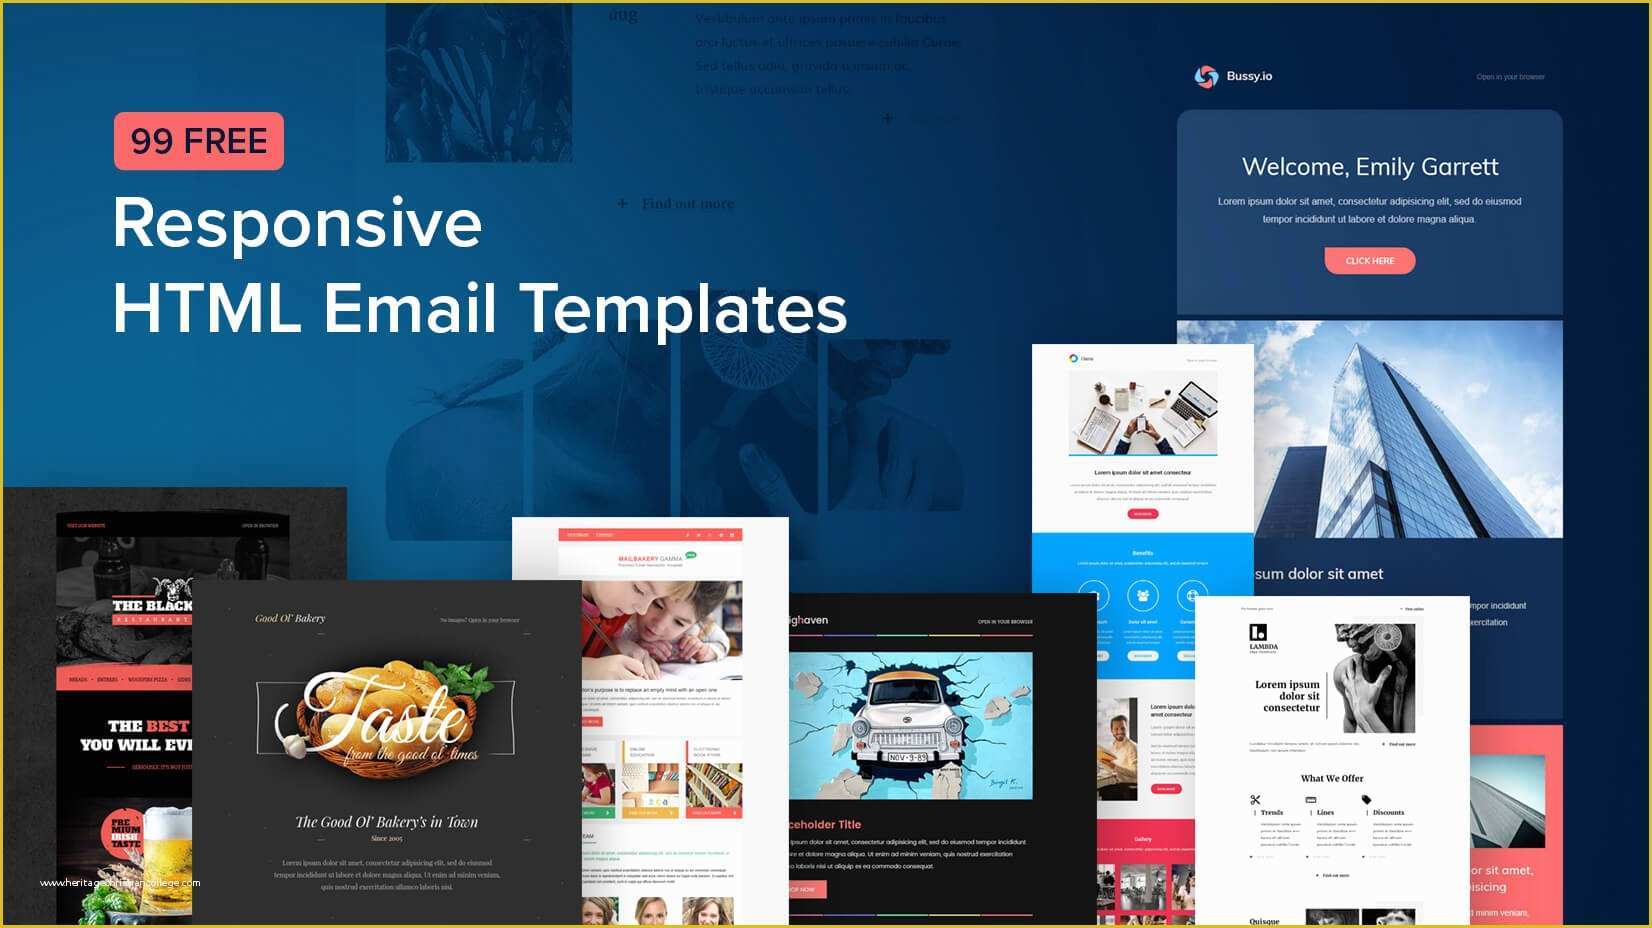 Free Prestashop Email Templates Of 99 Free Responsive HTML Email Templates to Grab In 2018